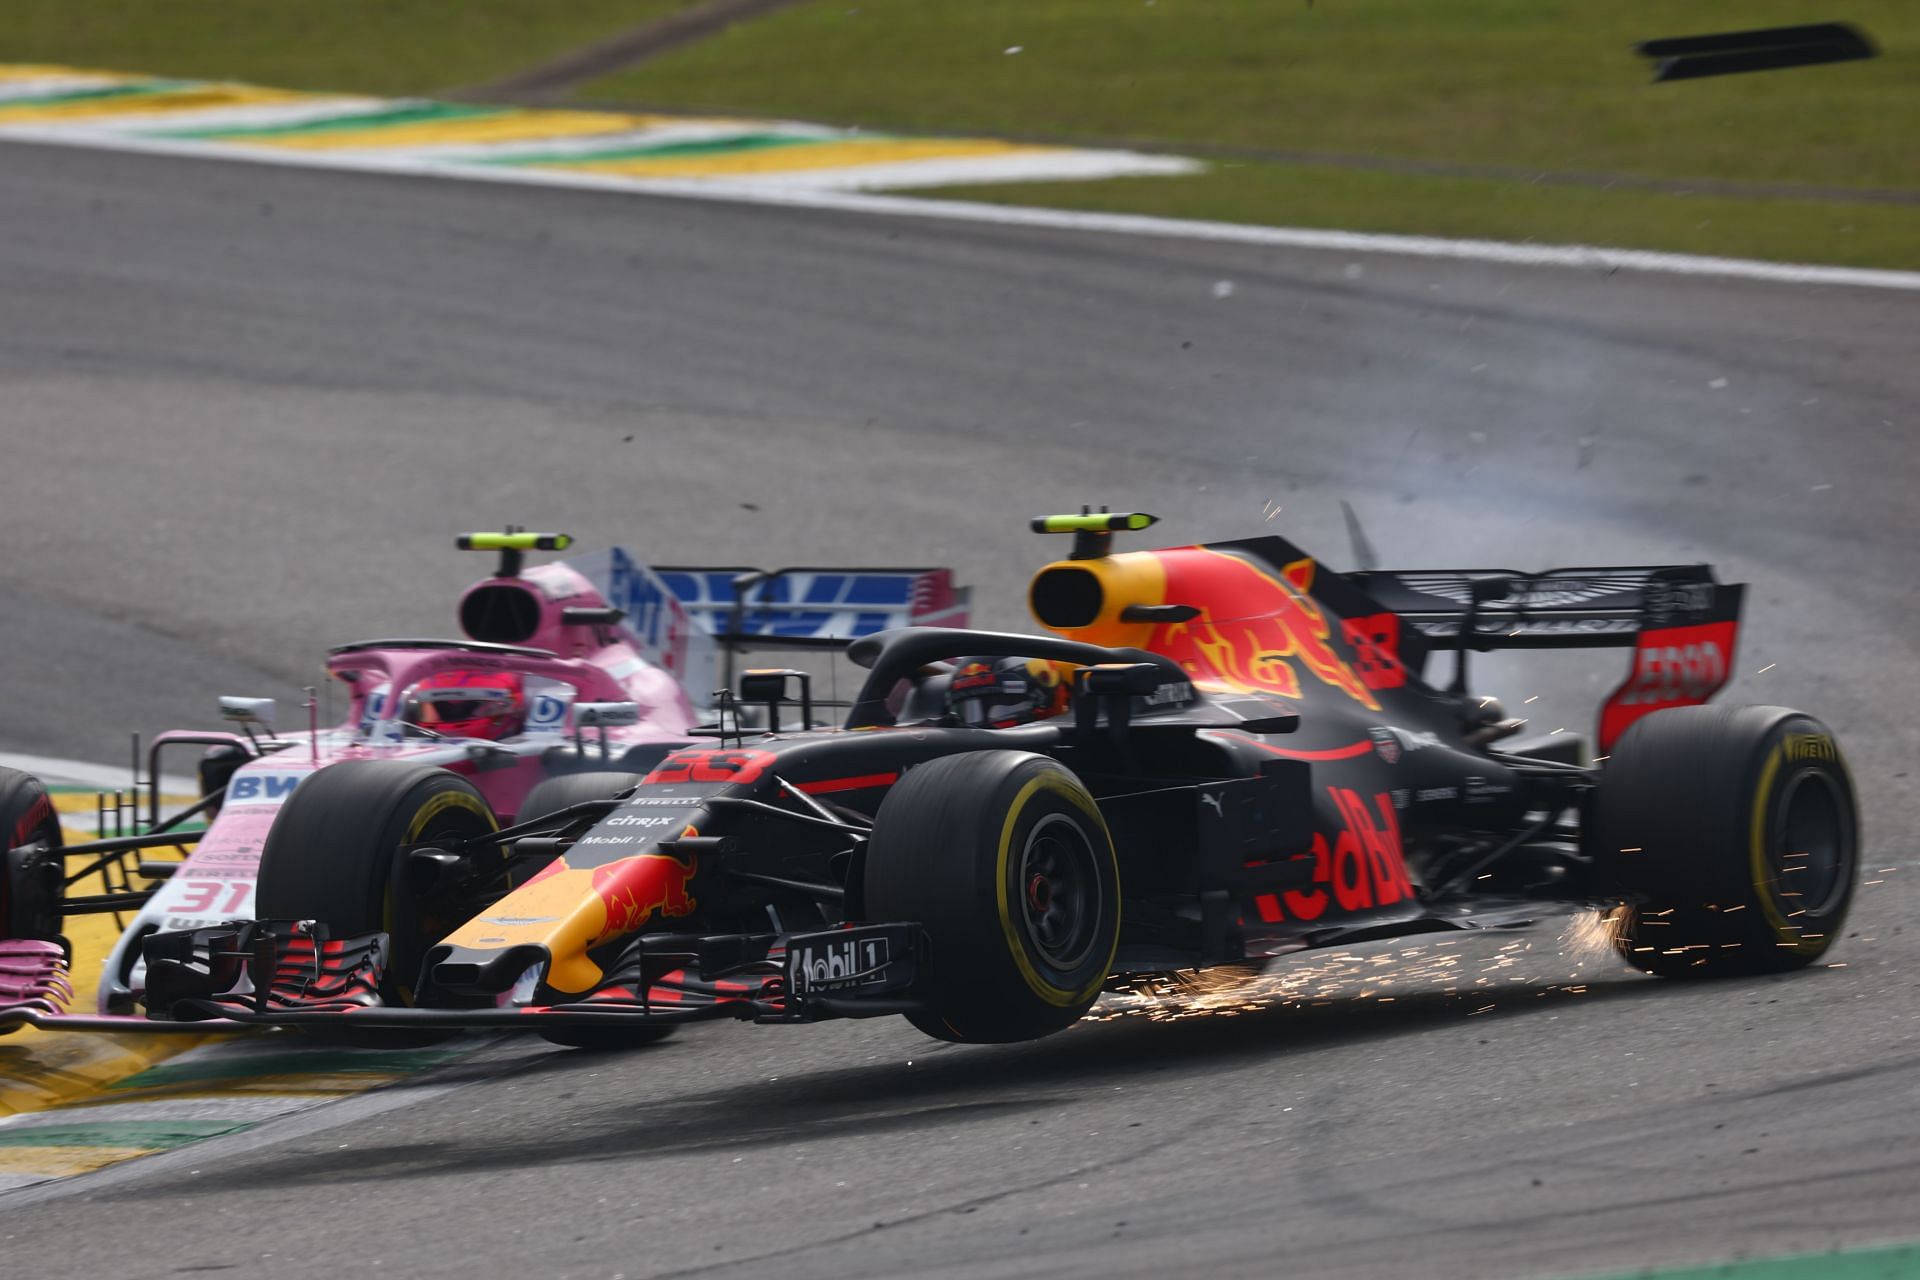 Esteban Ocon (left) and Max Verstappen (right) had an altercation following an incident in Brazil 2018